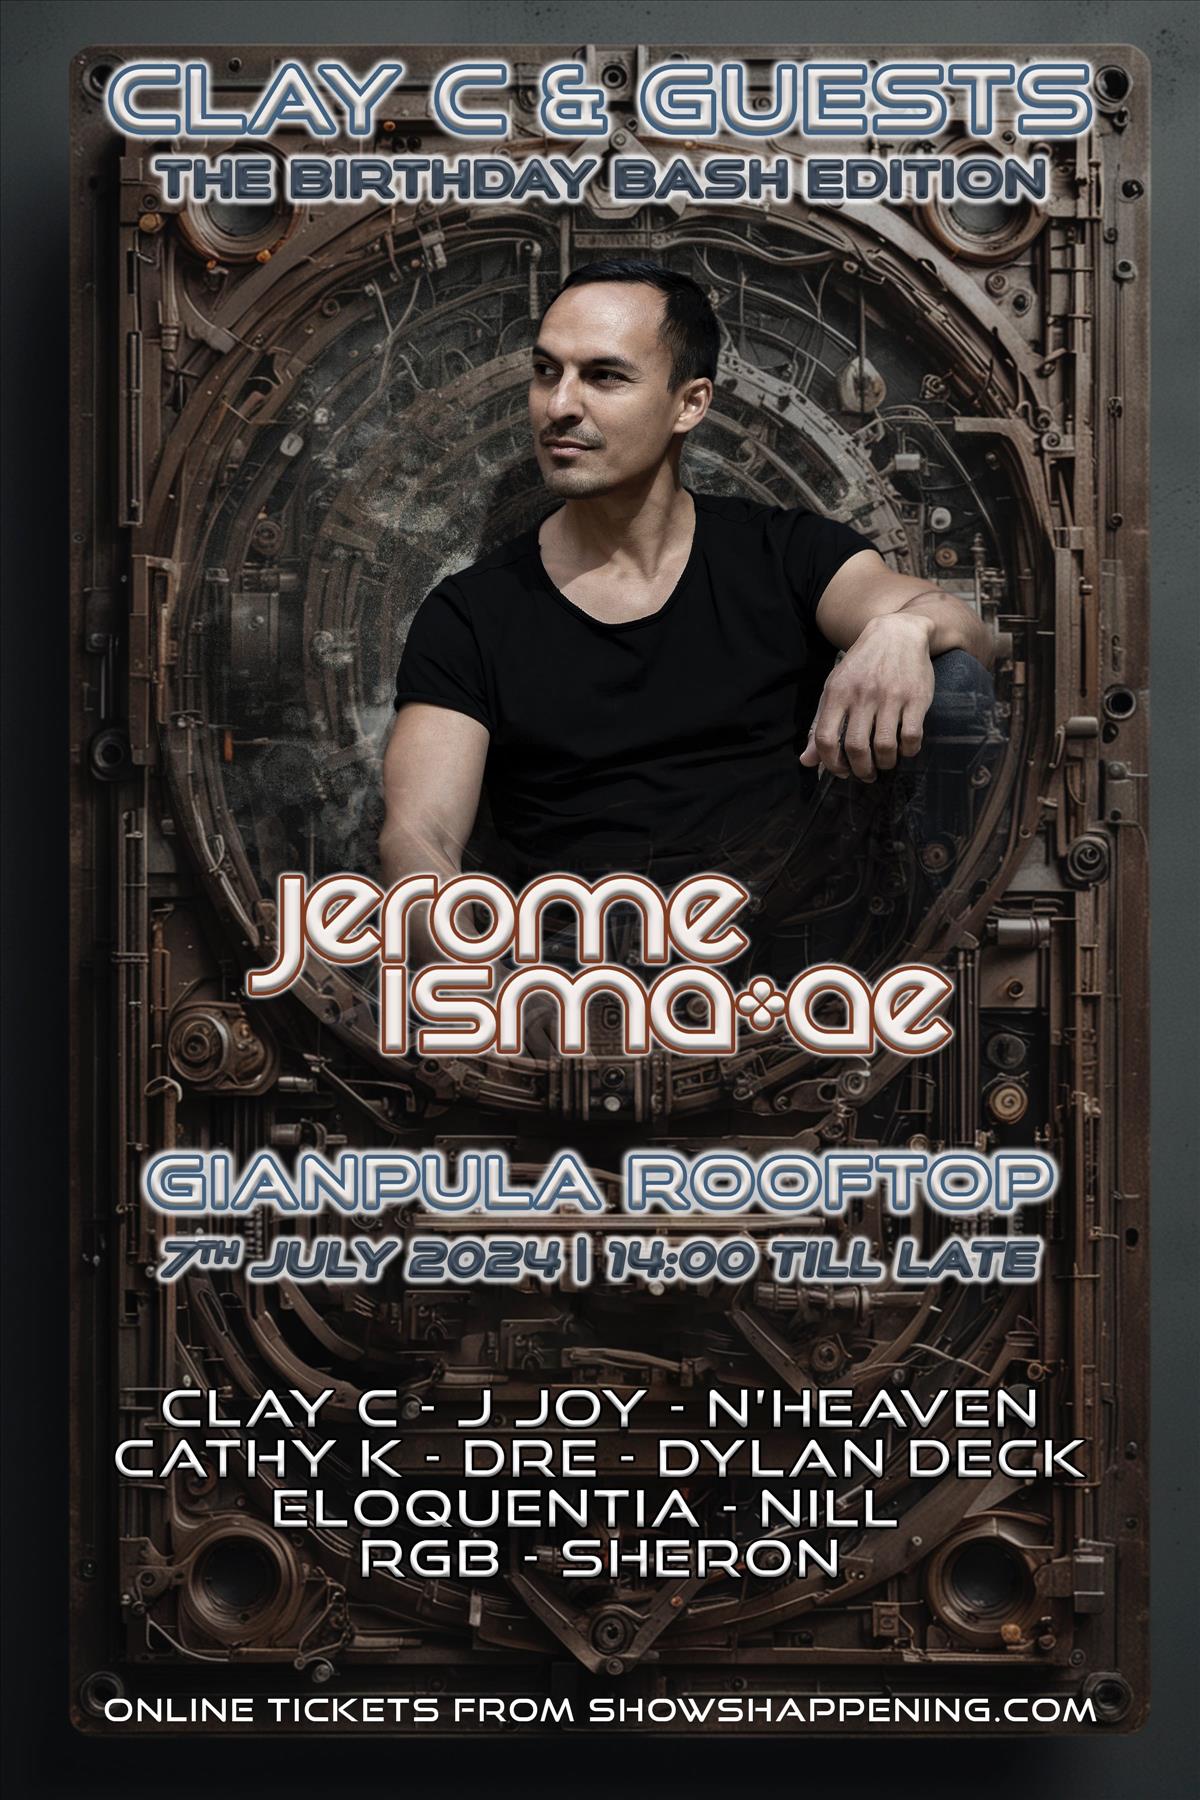 Clay C & Guests - The Birthday Bash Edition With Jerome Isma-ae